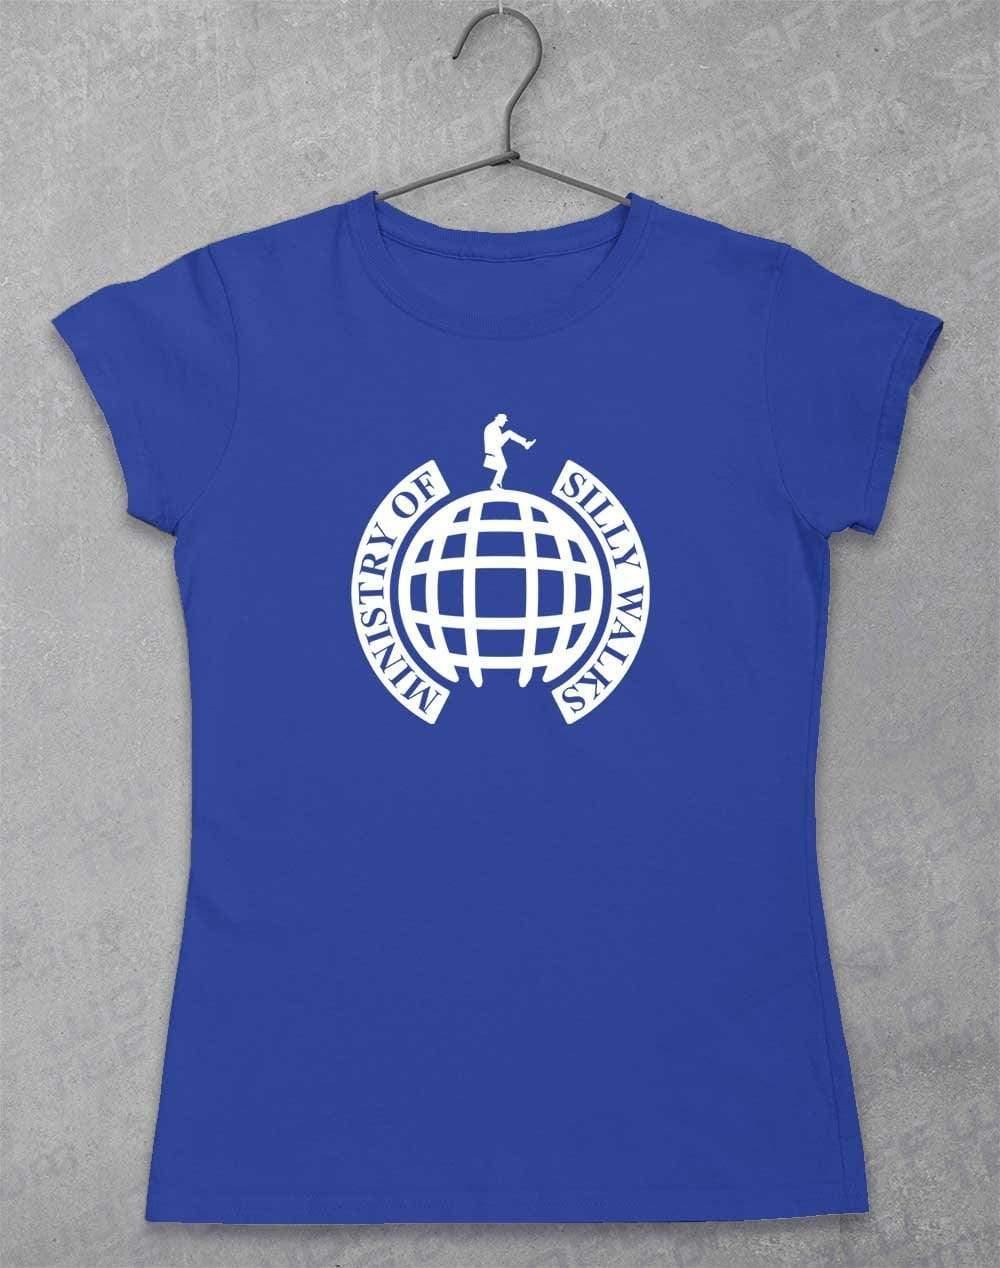 Ministry of Silly Walks Womens T-Shirt 8-10 / Royal  - Off World Tees